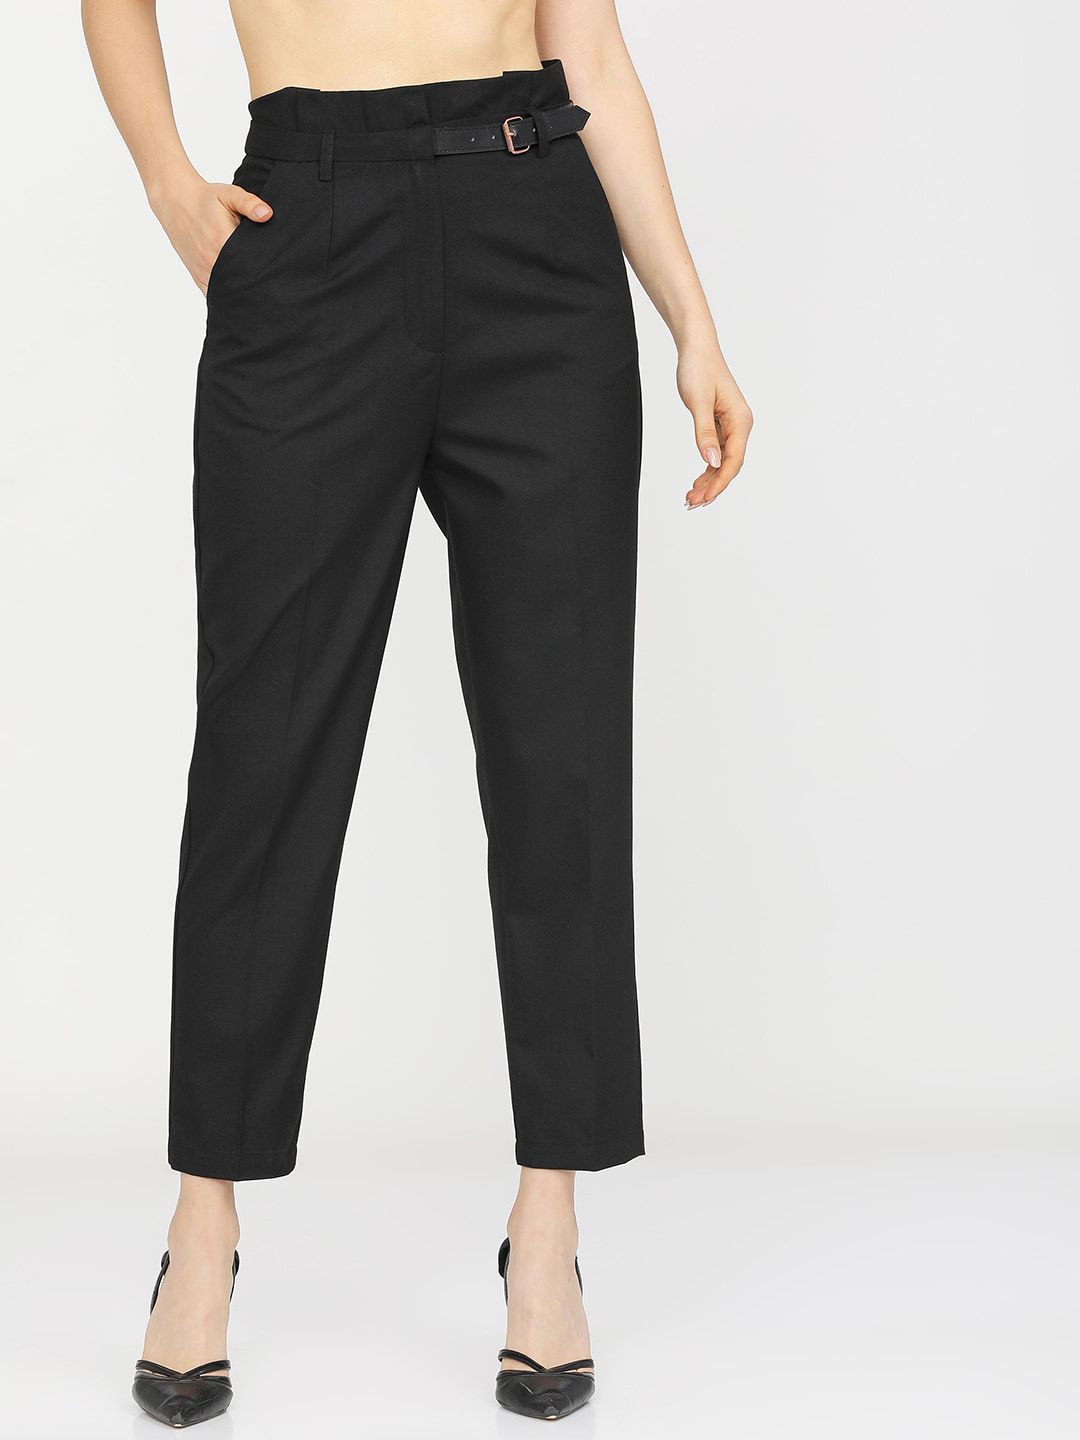 Tokyo Talkies Women Black Tapered Fit Pleated Trousers Price in India